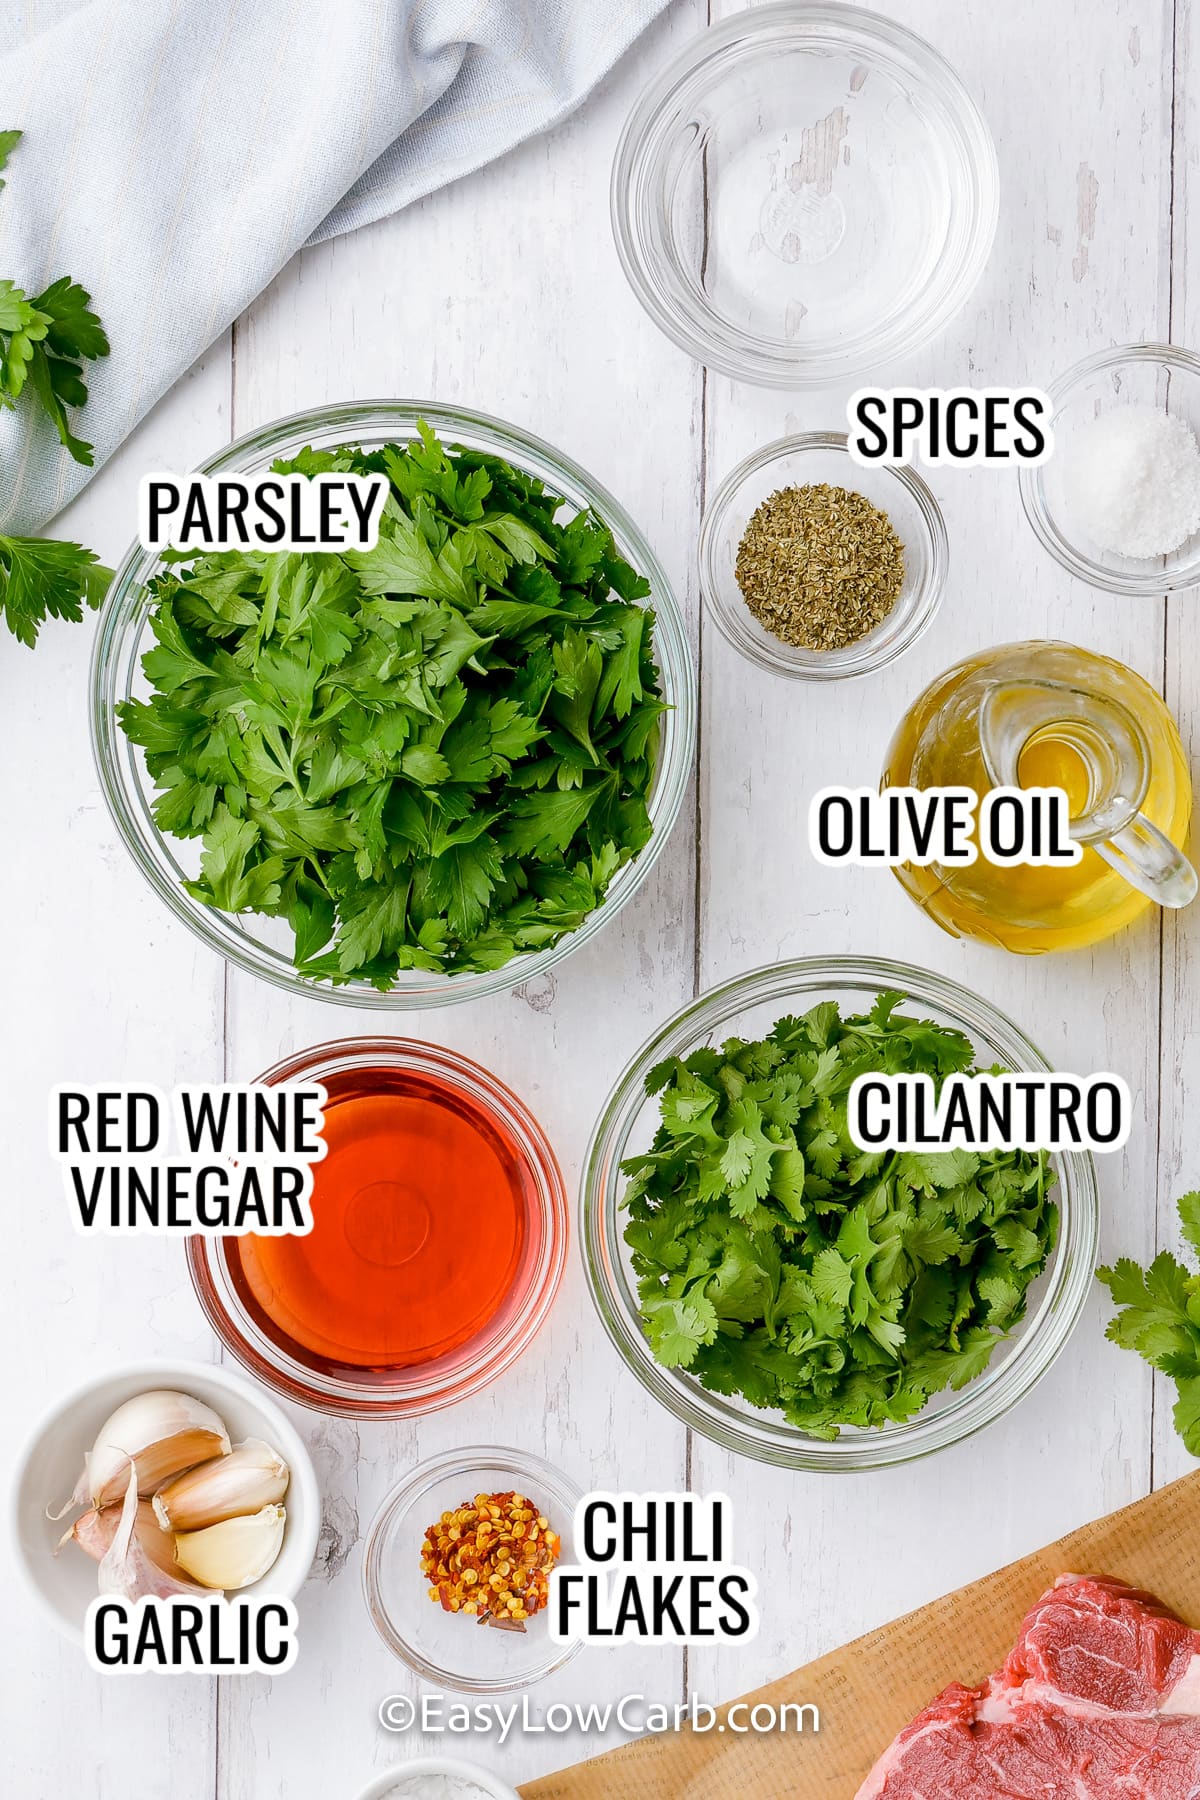 ingredients assembled to make easy chimichurri sauce including parsley, cilantro, olive oil, red wine vinegar, garlic and spices